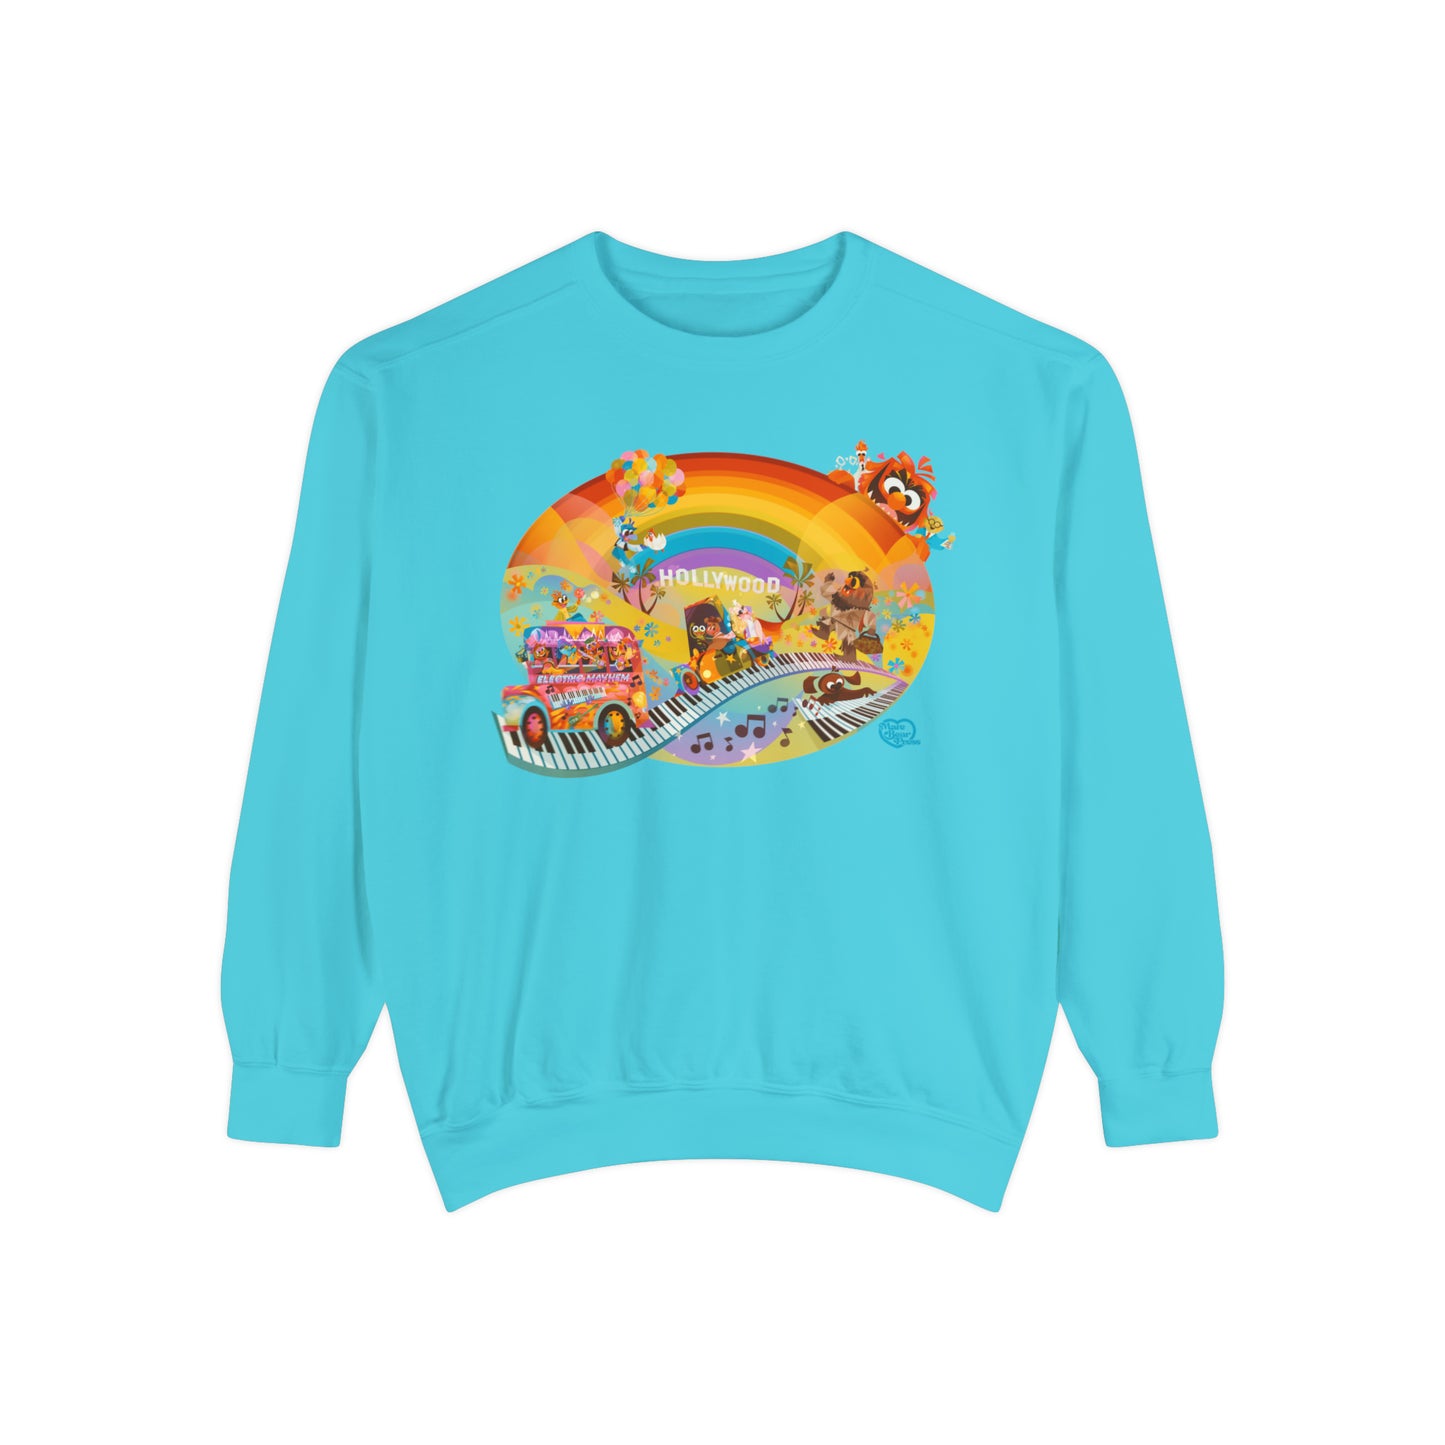 The Lovers, The Dreamers, & You Sweatshirt